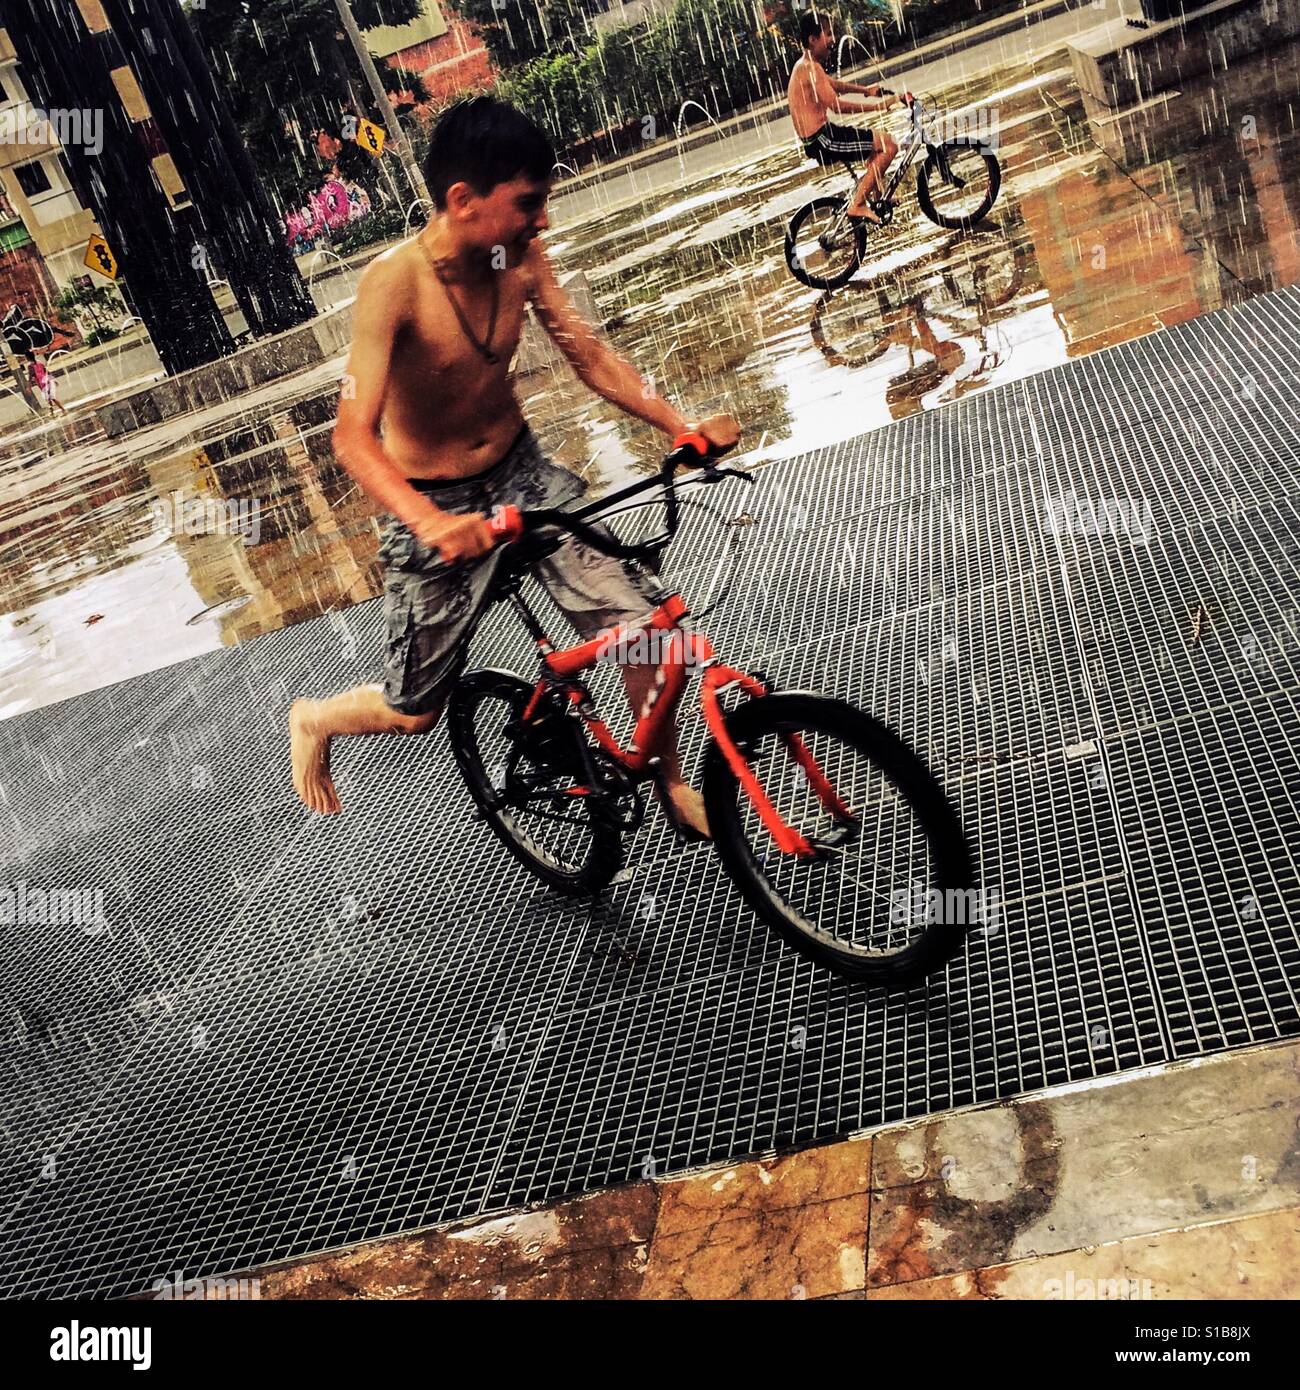 Colombian boys perform tricks on BMX bikes during the rain in Parque Chimeneas, Itagüí, Colombia, 19 November 2016. Stock Photo